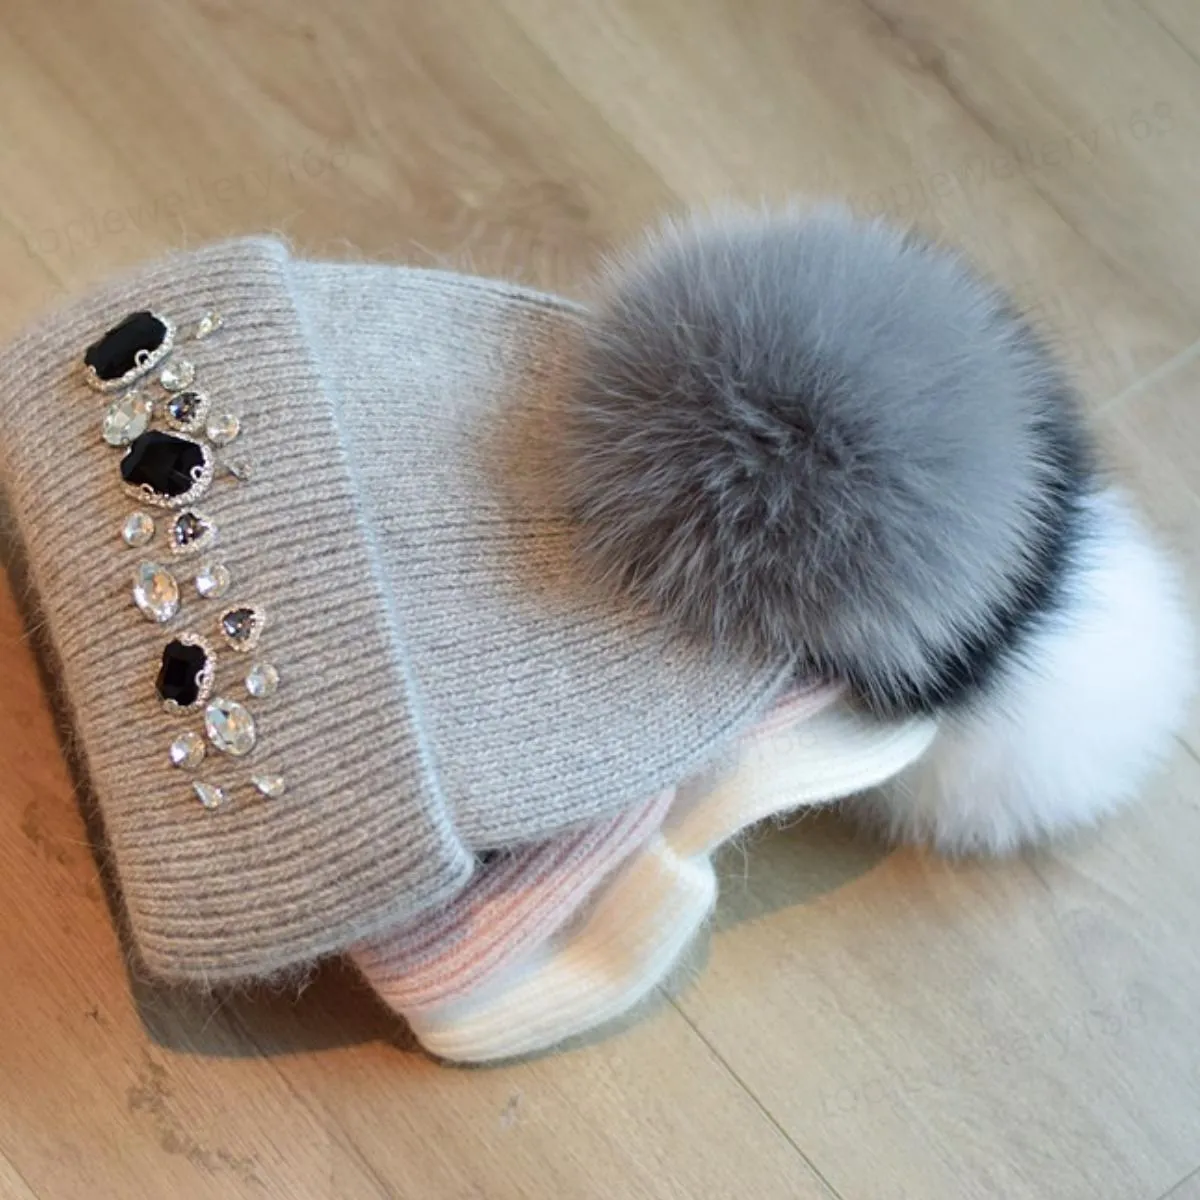 Autumn Winter Knitted Wool Hats For Women Fashion Pompon Beanies Fur Hat Female Warm Caps With Natural Rabbit Hair Cap